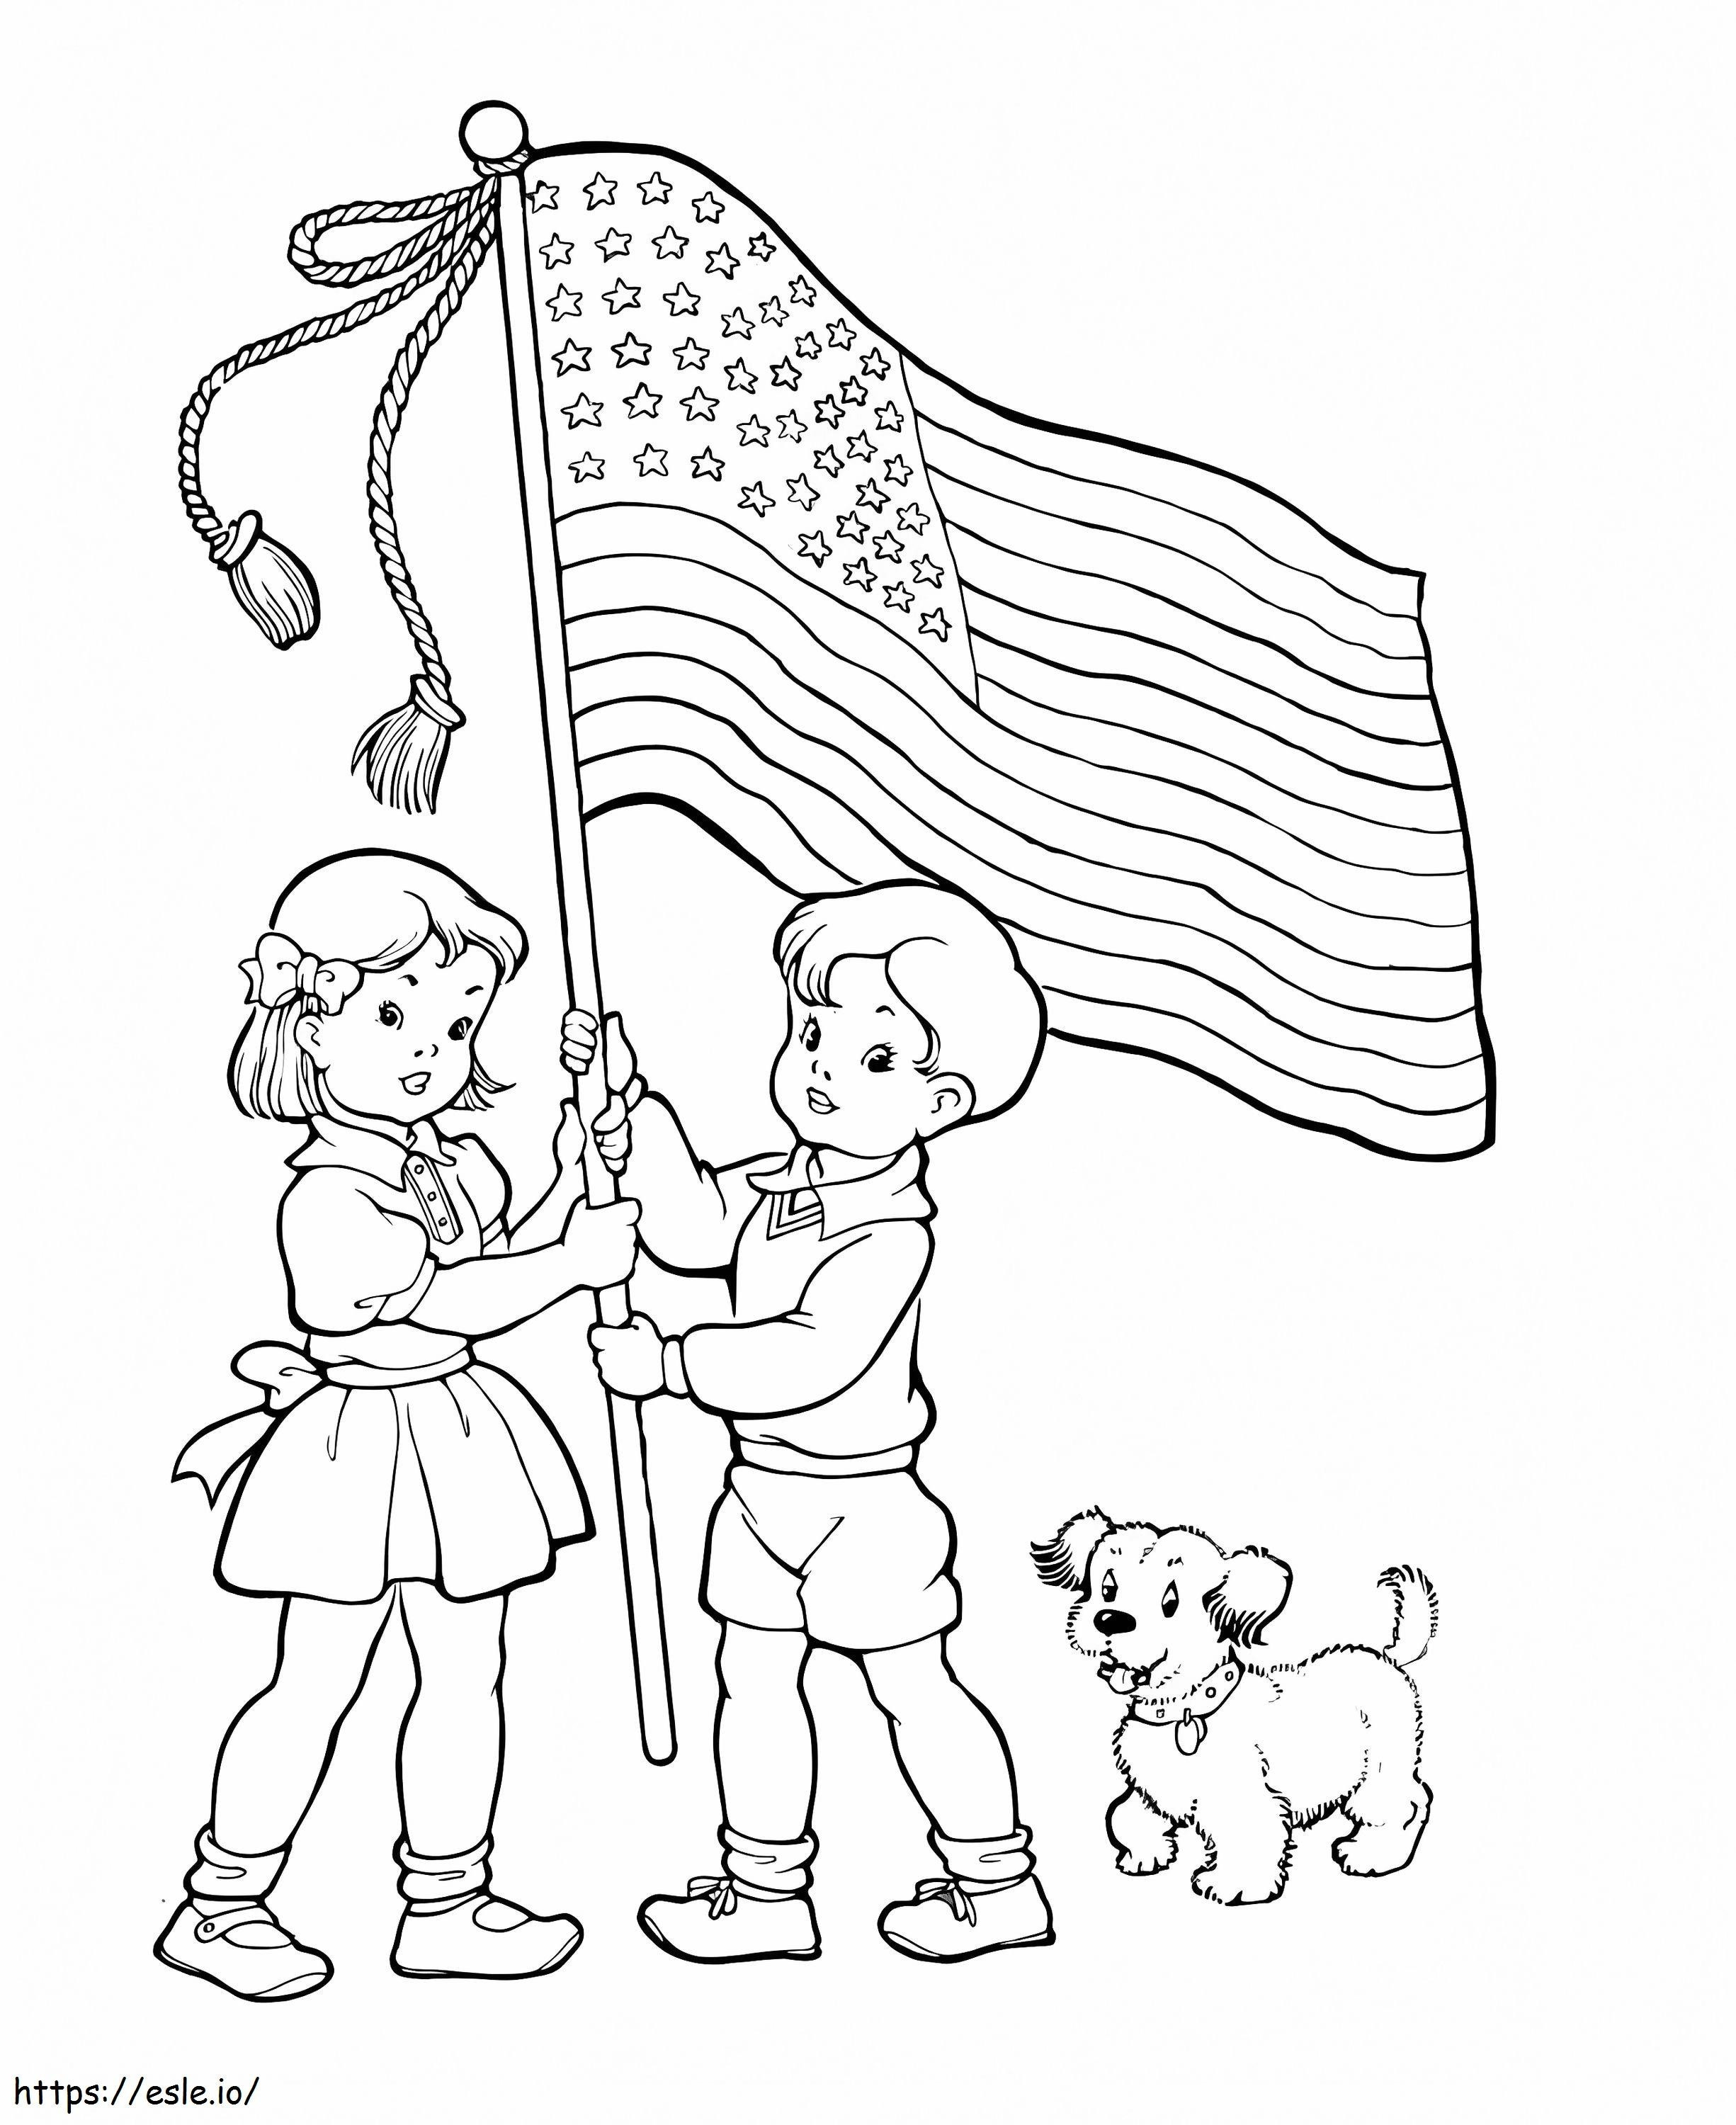 Kids With Flag Day coloring page